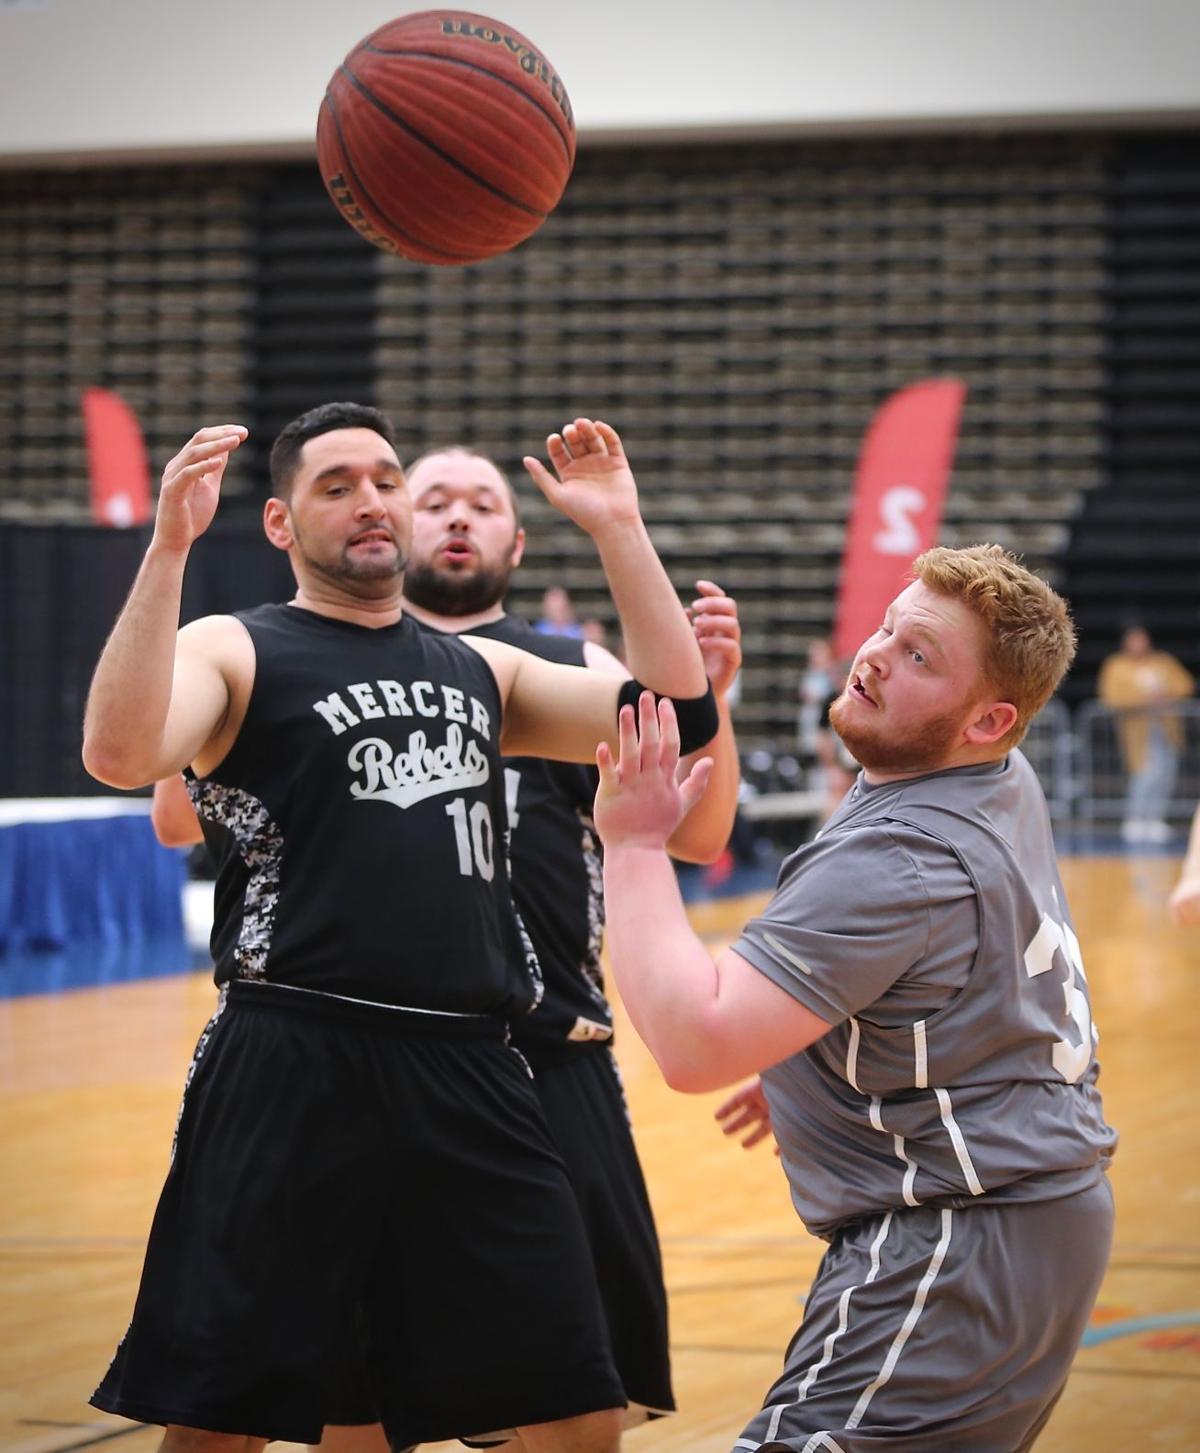 GALLERY Special Olympics basketball tournament in Wildwood Sports